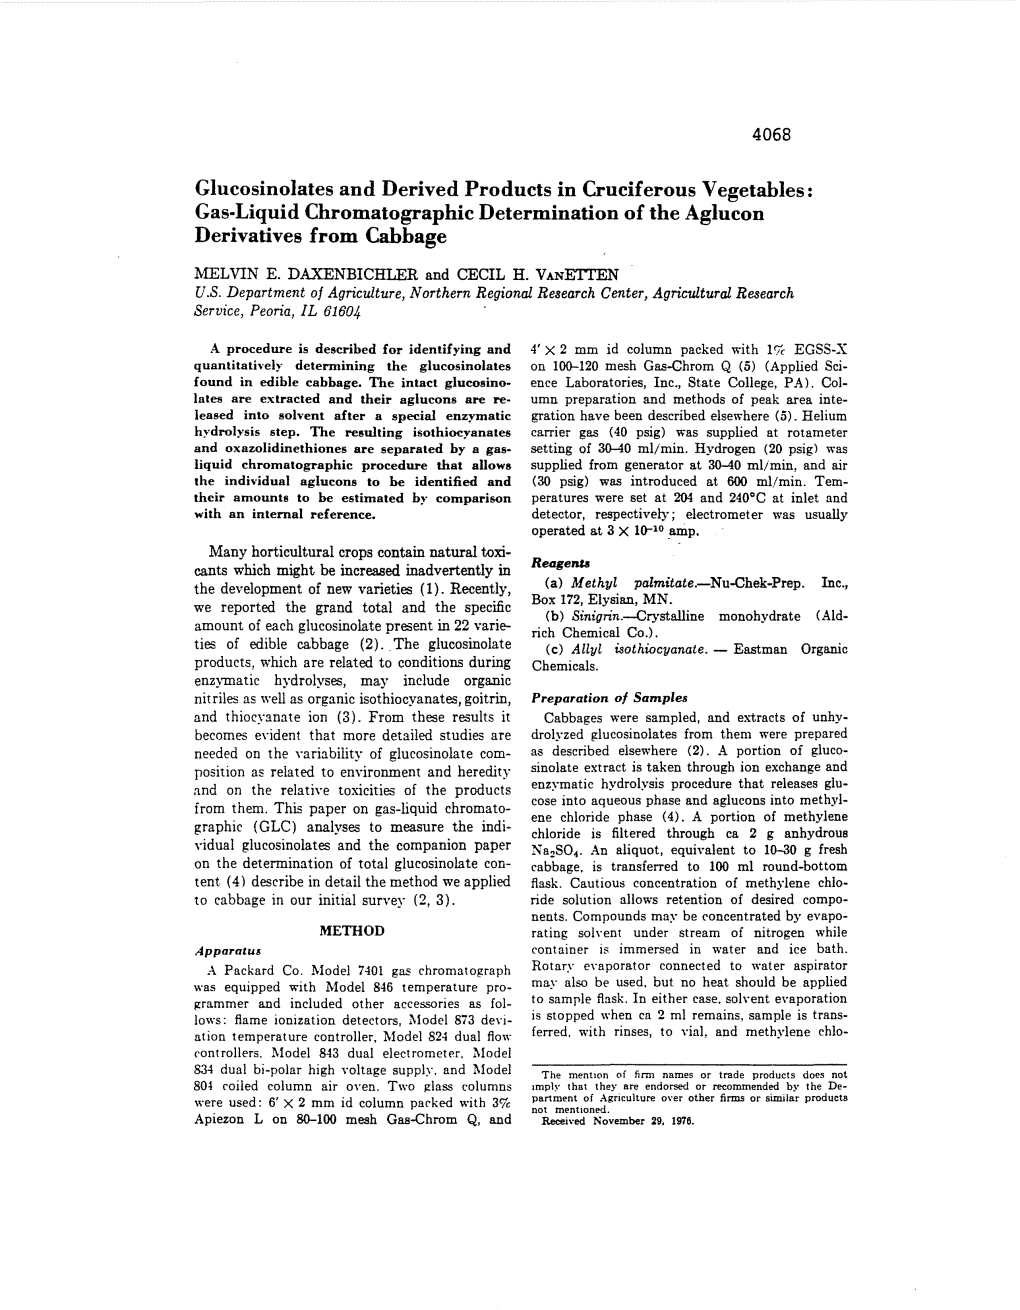 Gas-Liquid Chromatographic Determination of the Aglucon Derivatives from Cabbage